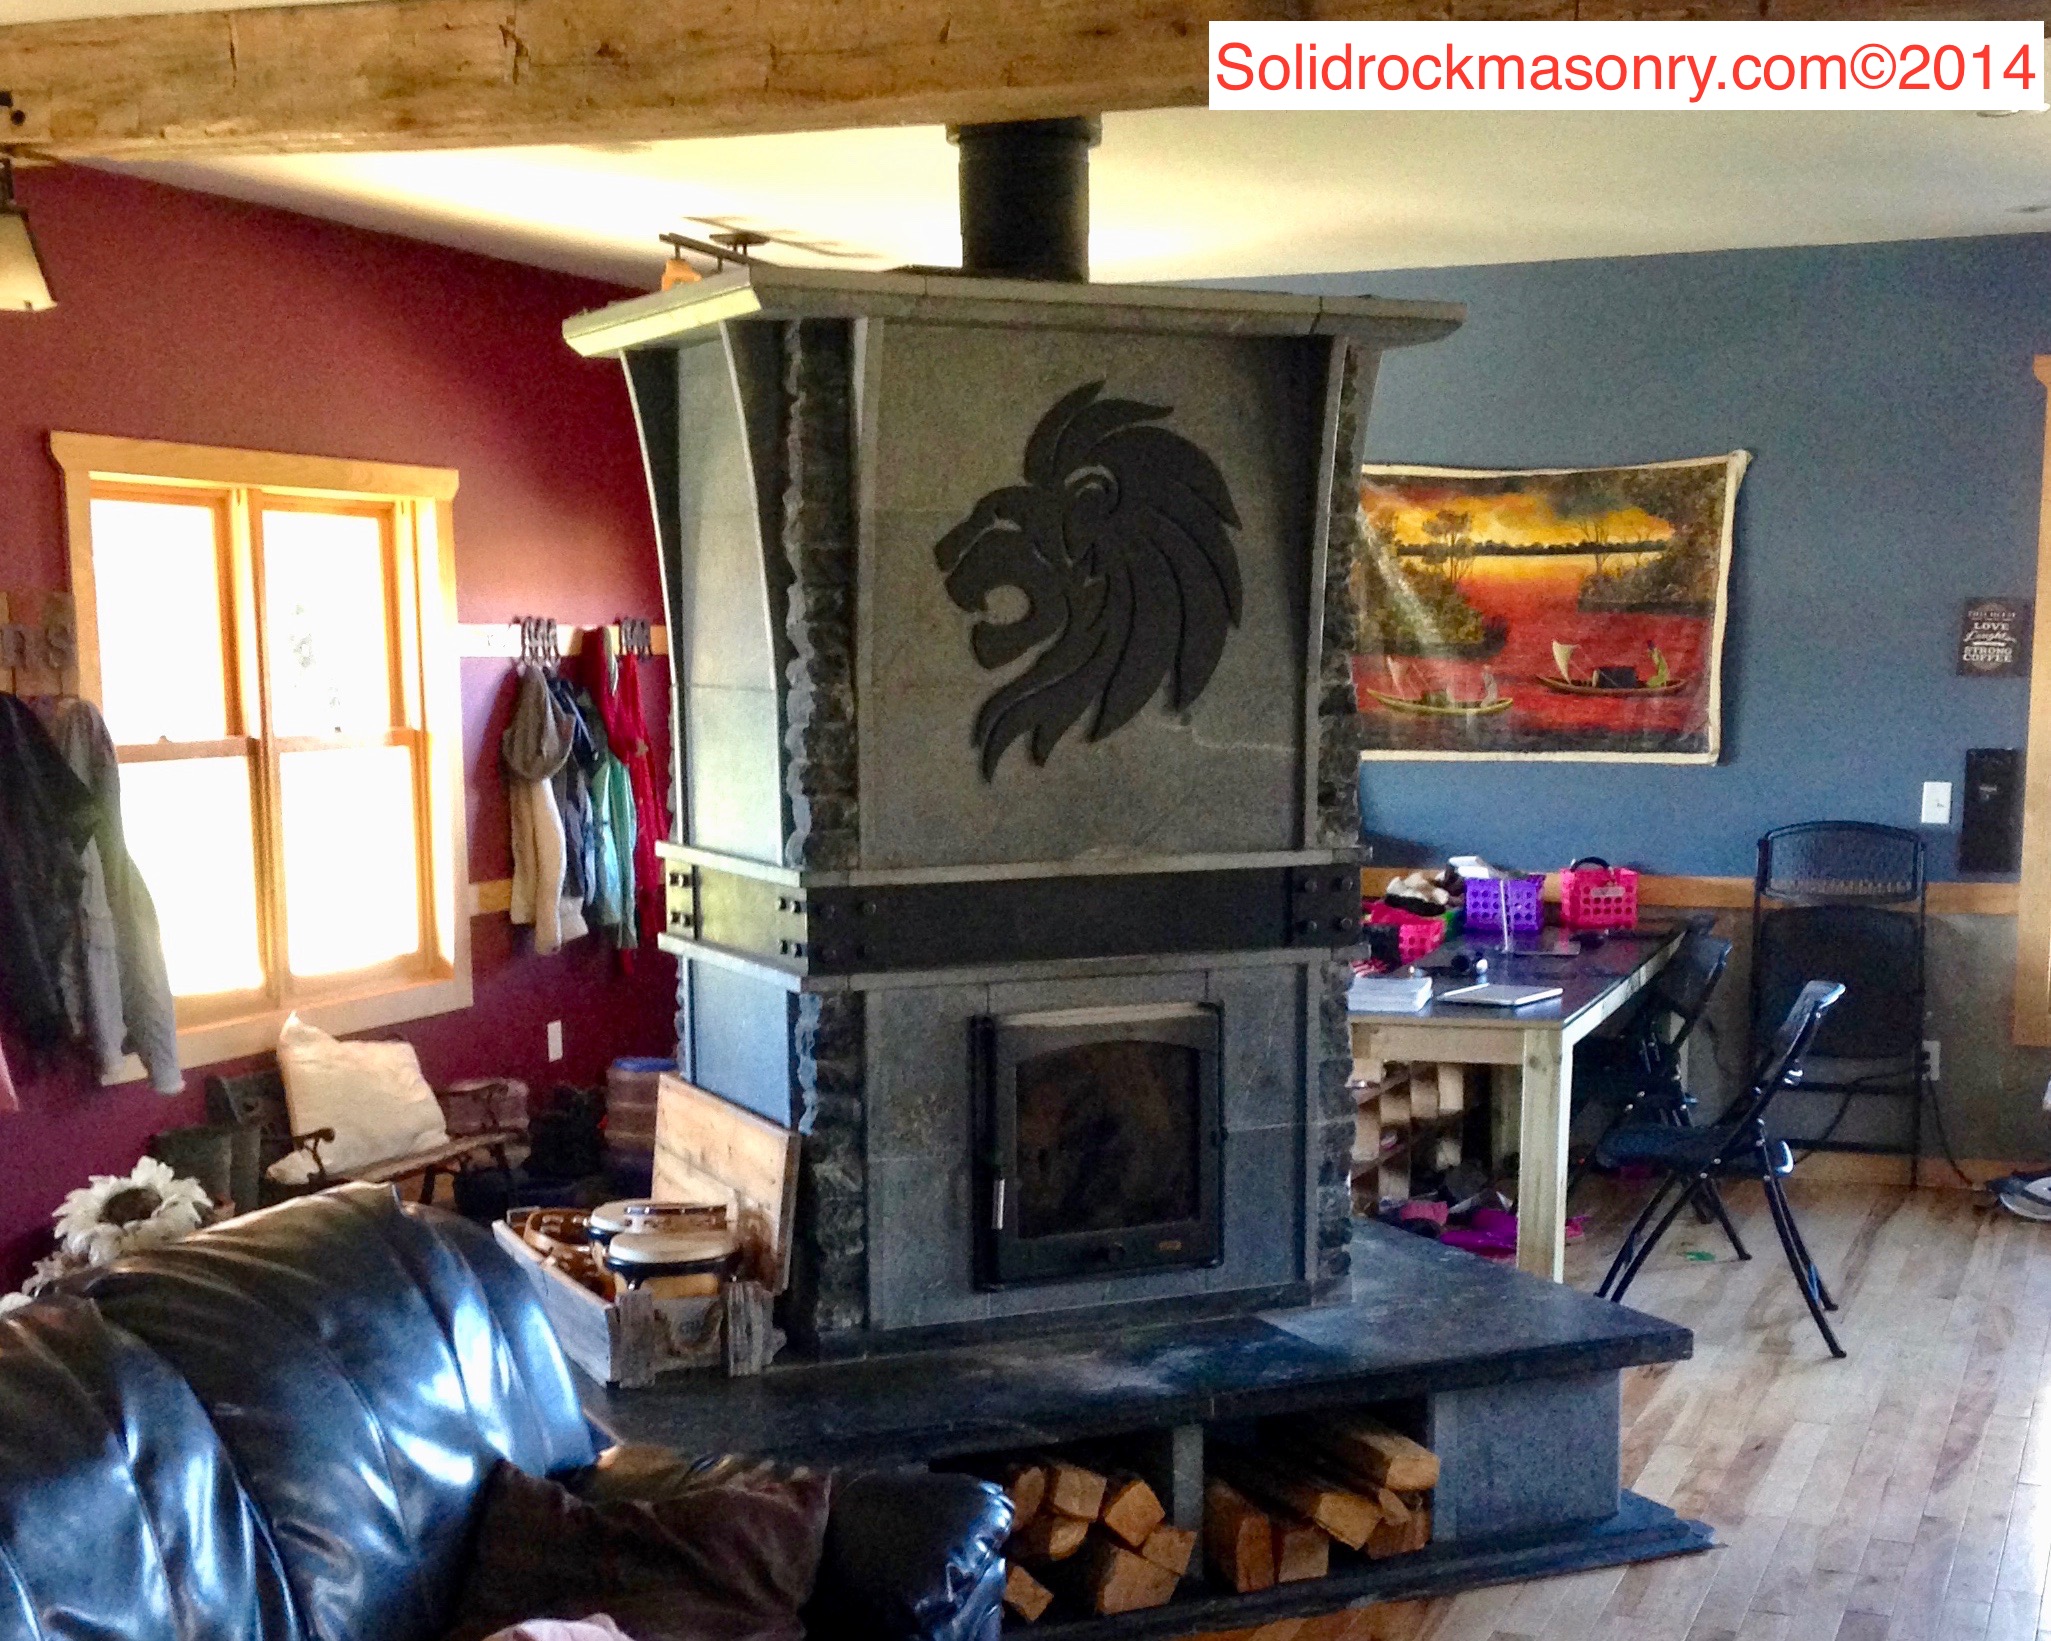 Christensen SR-18 see-thru masonry heater Finished in Custom Alberene Soapstone with a 4 sided bench